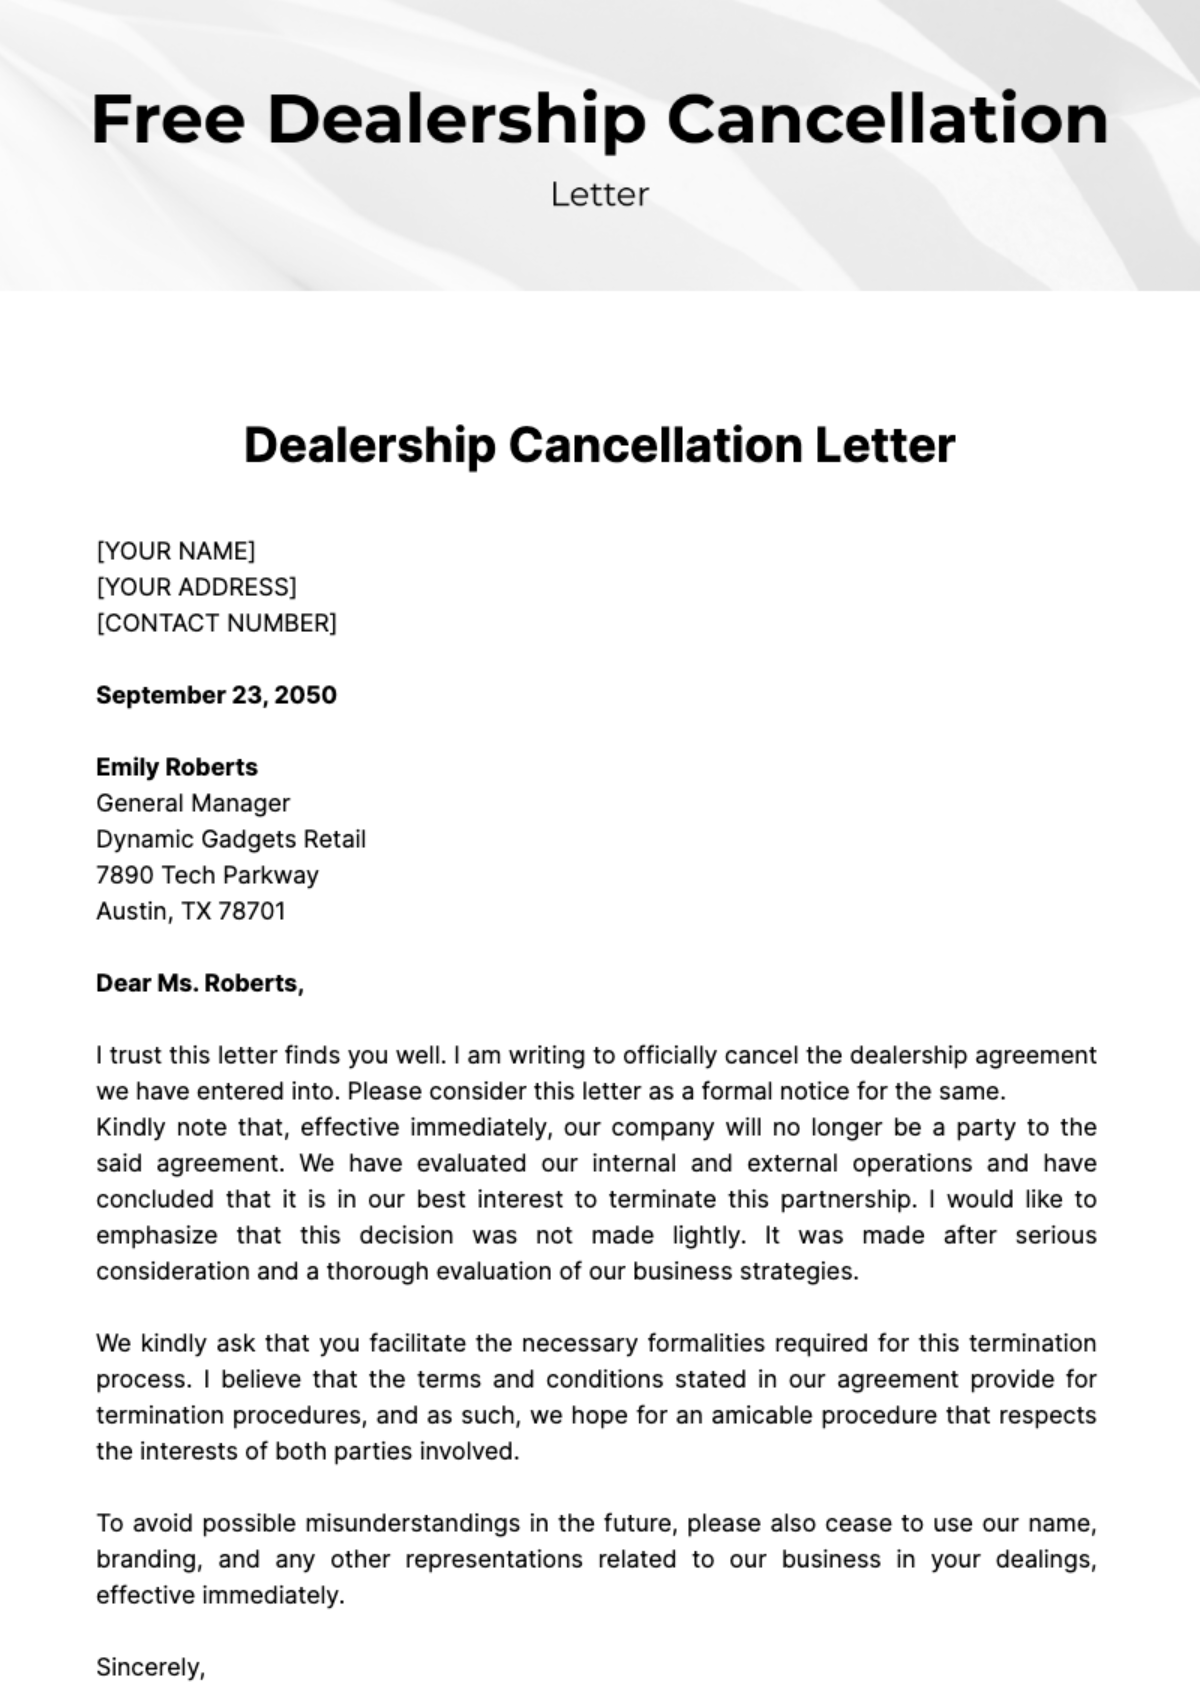 Free Dealership Cancellation Letter Template